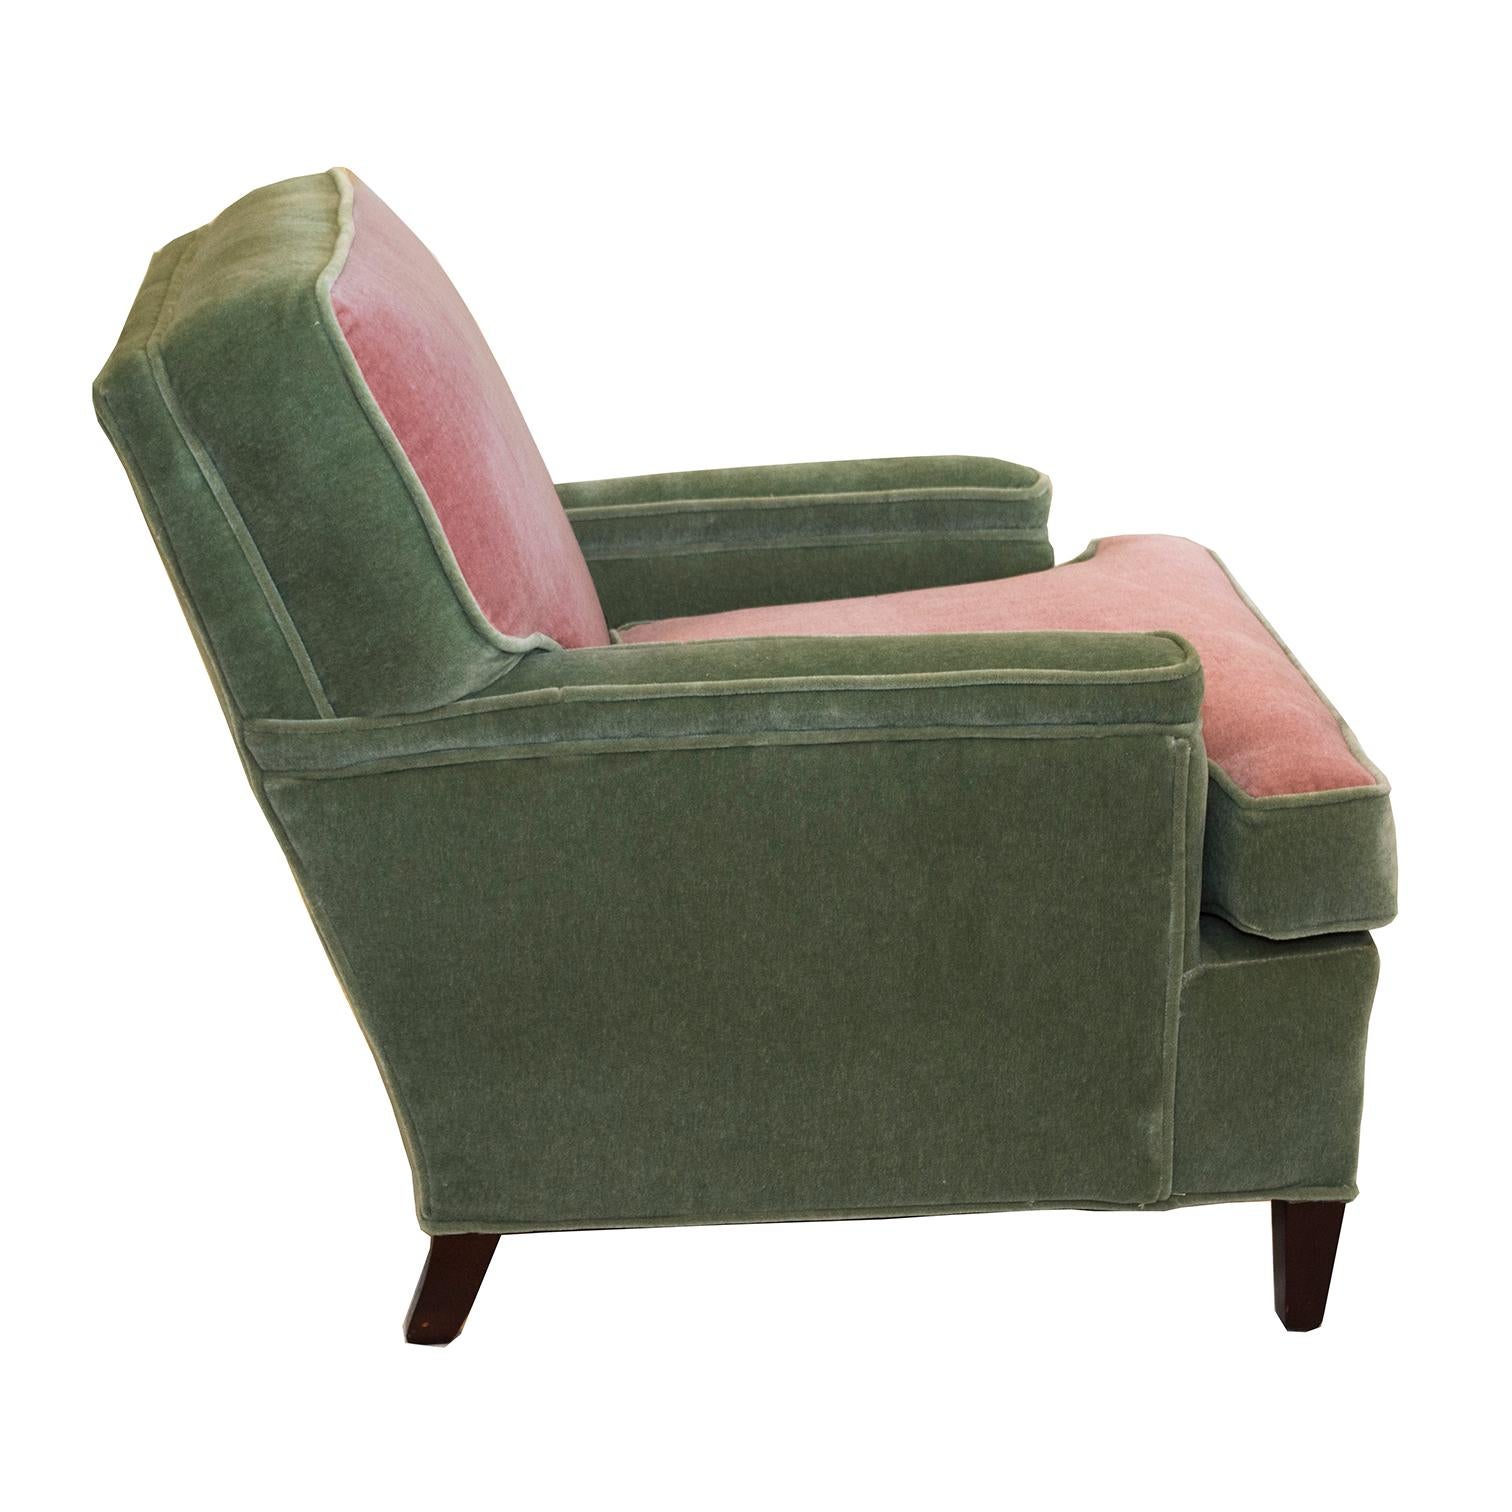 American 1950s Art Deco Lawson-back just reupholstered Green & Pink Mohair Club Chairs 